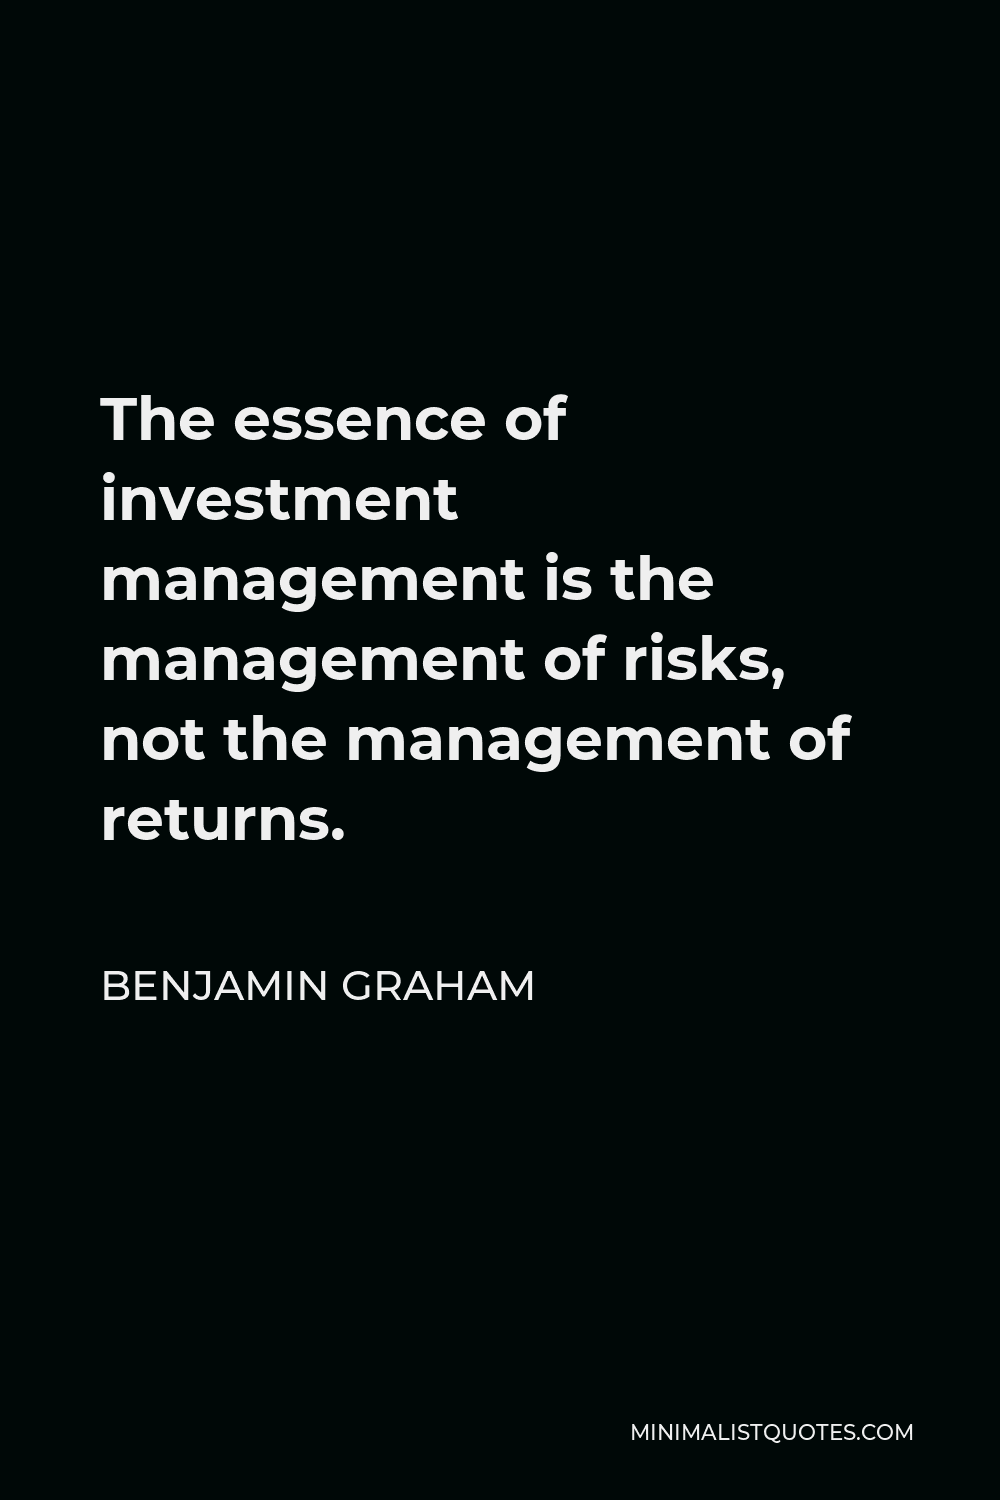 Benjamin Graham Quote - The essence of investment management is the management of risks, not the management of returns.